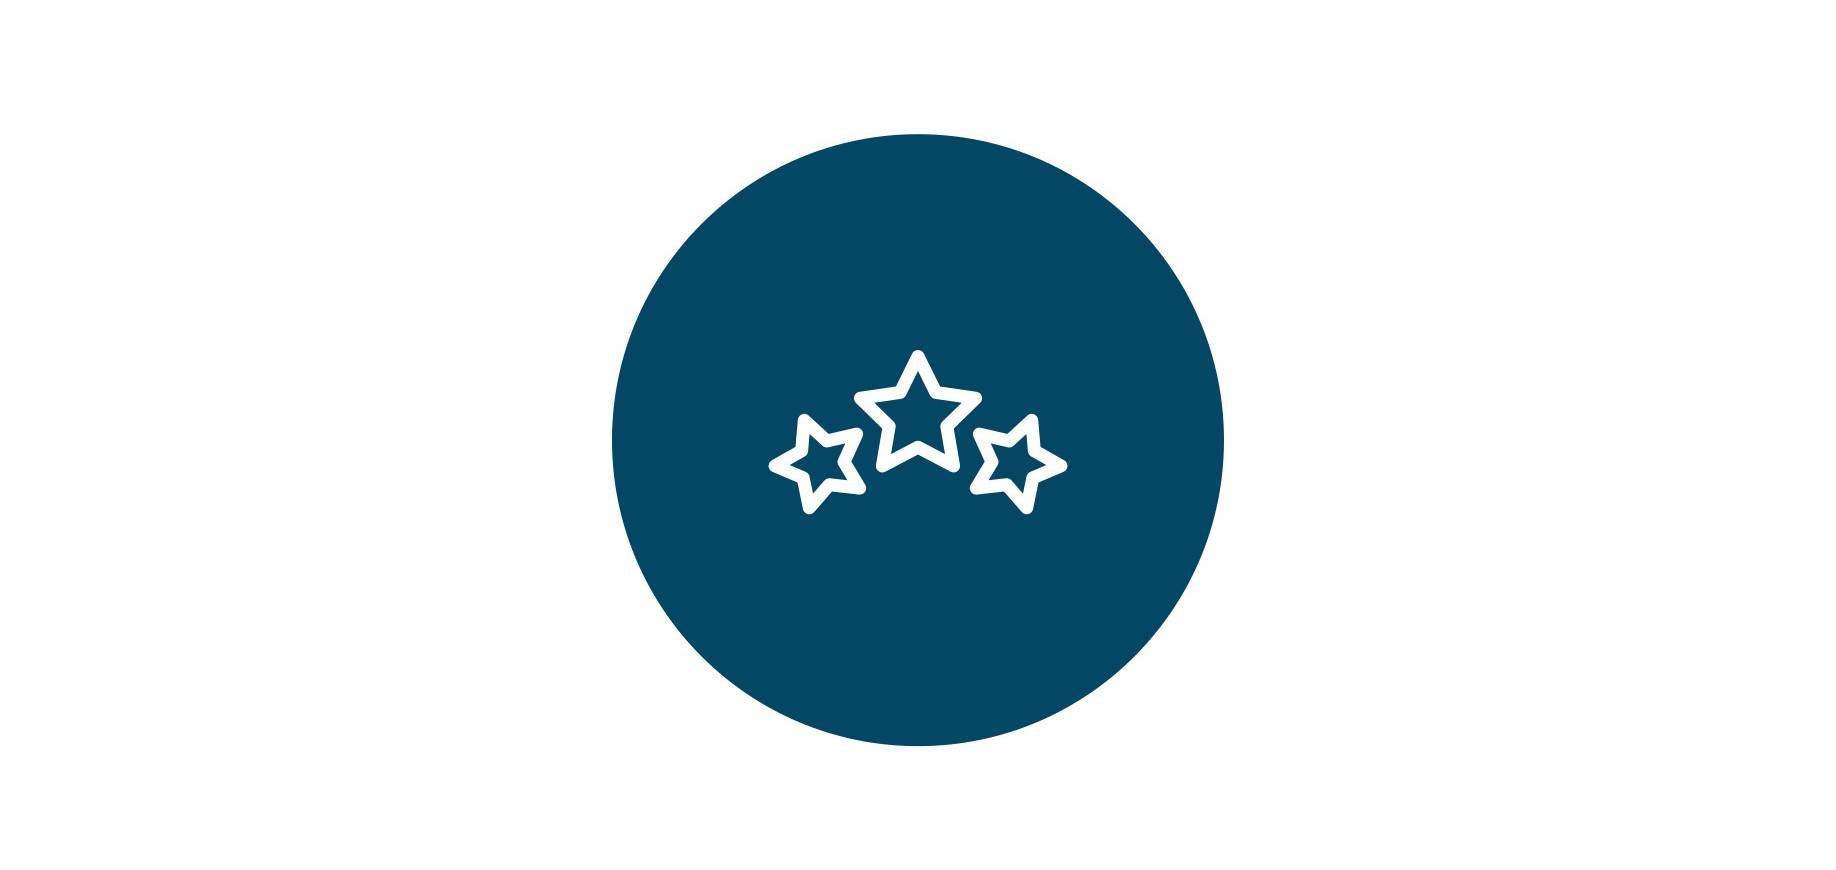 three white stars icon in blue circle representing perks for railway jobs